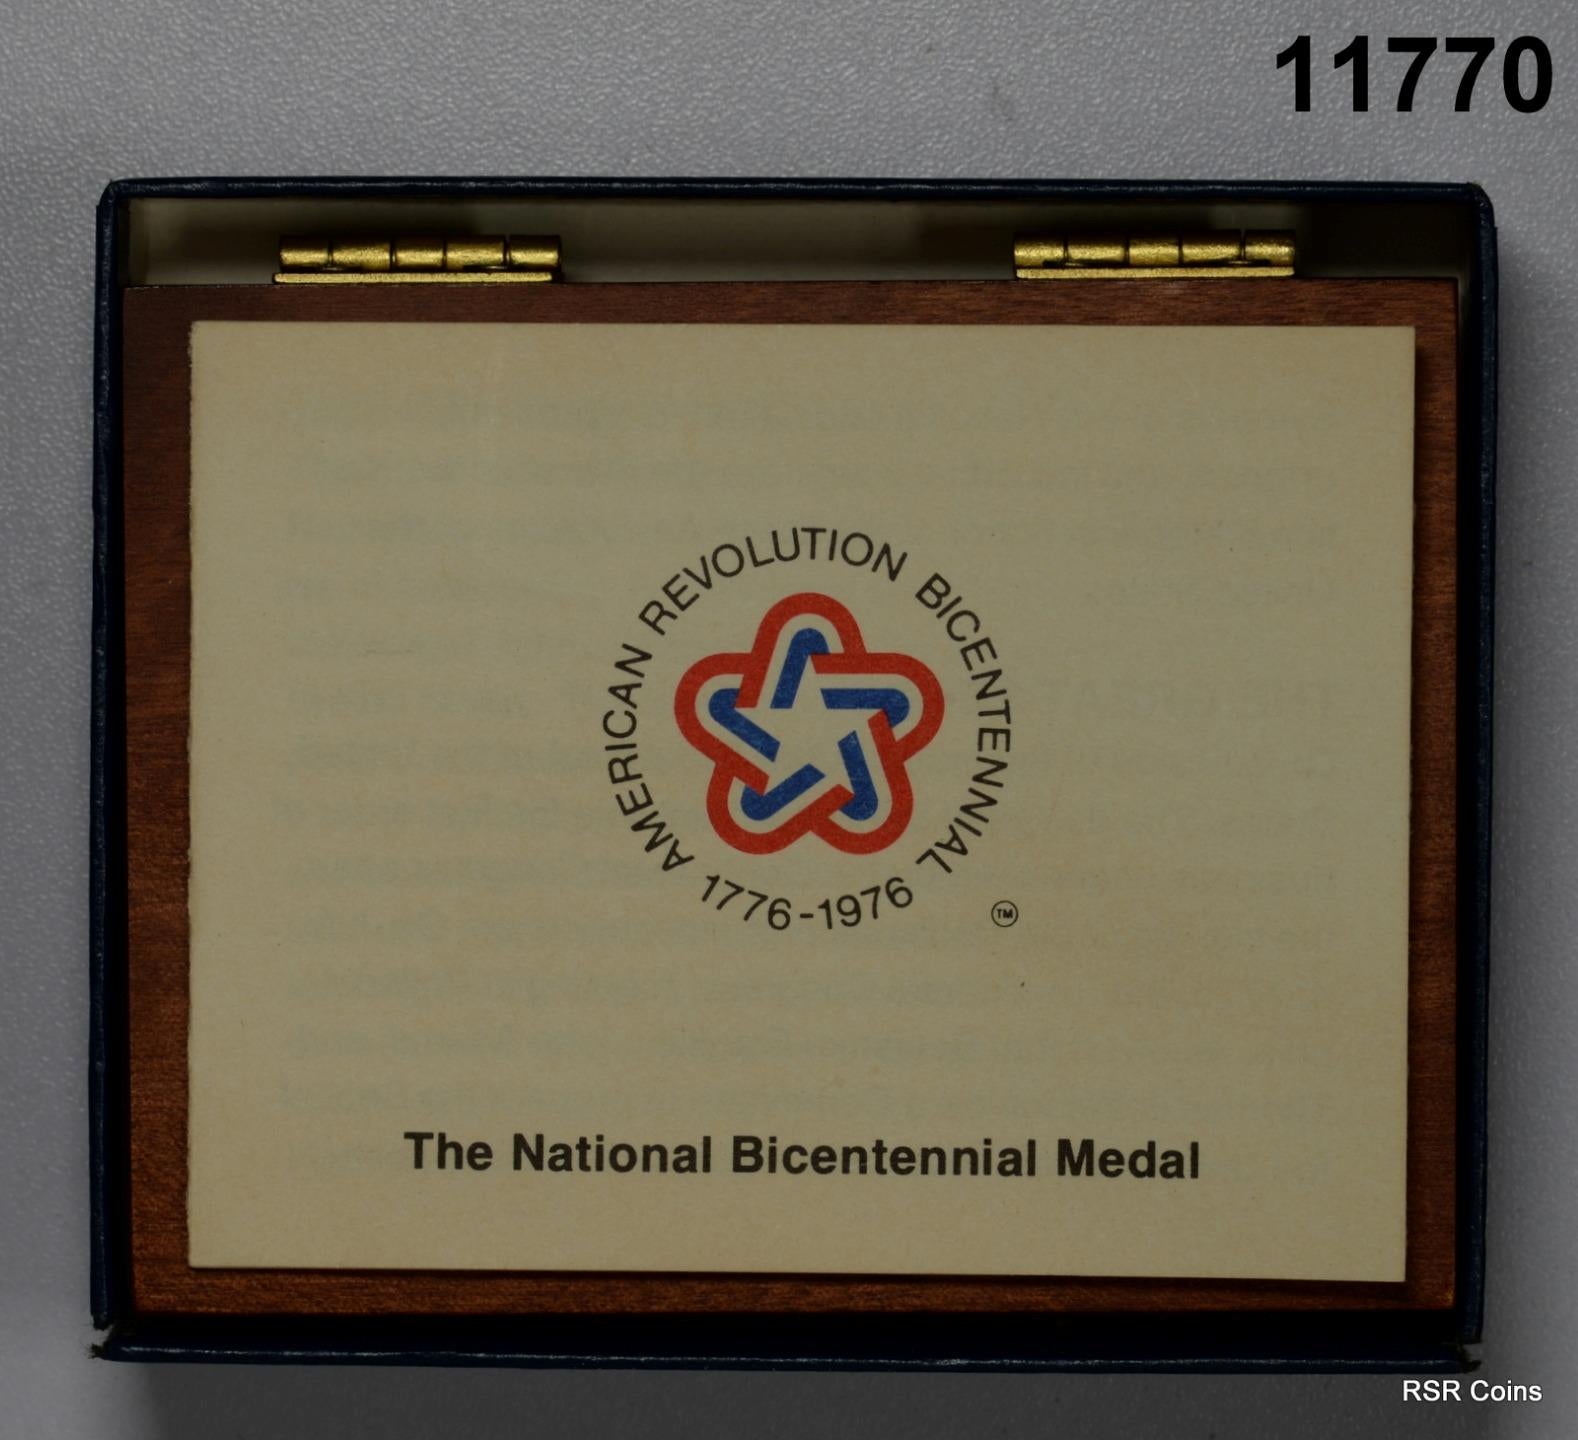 1976 GOLD US MINT 12.85 GRAMS PROOF NATIONAL BICENTENNIAL MEDAL IN BOX #11770